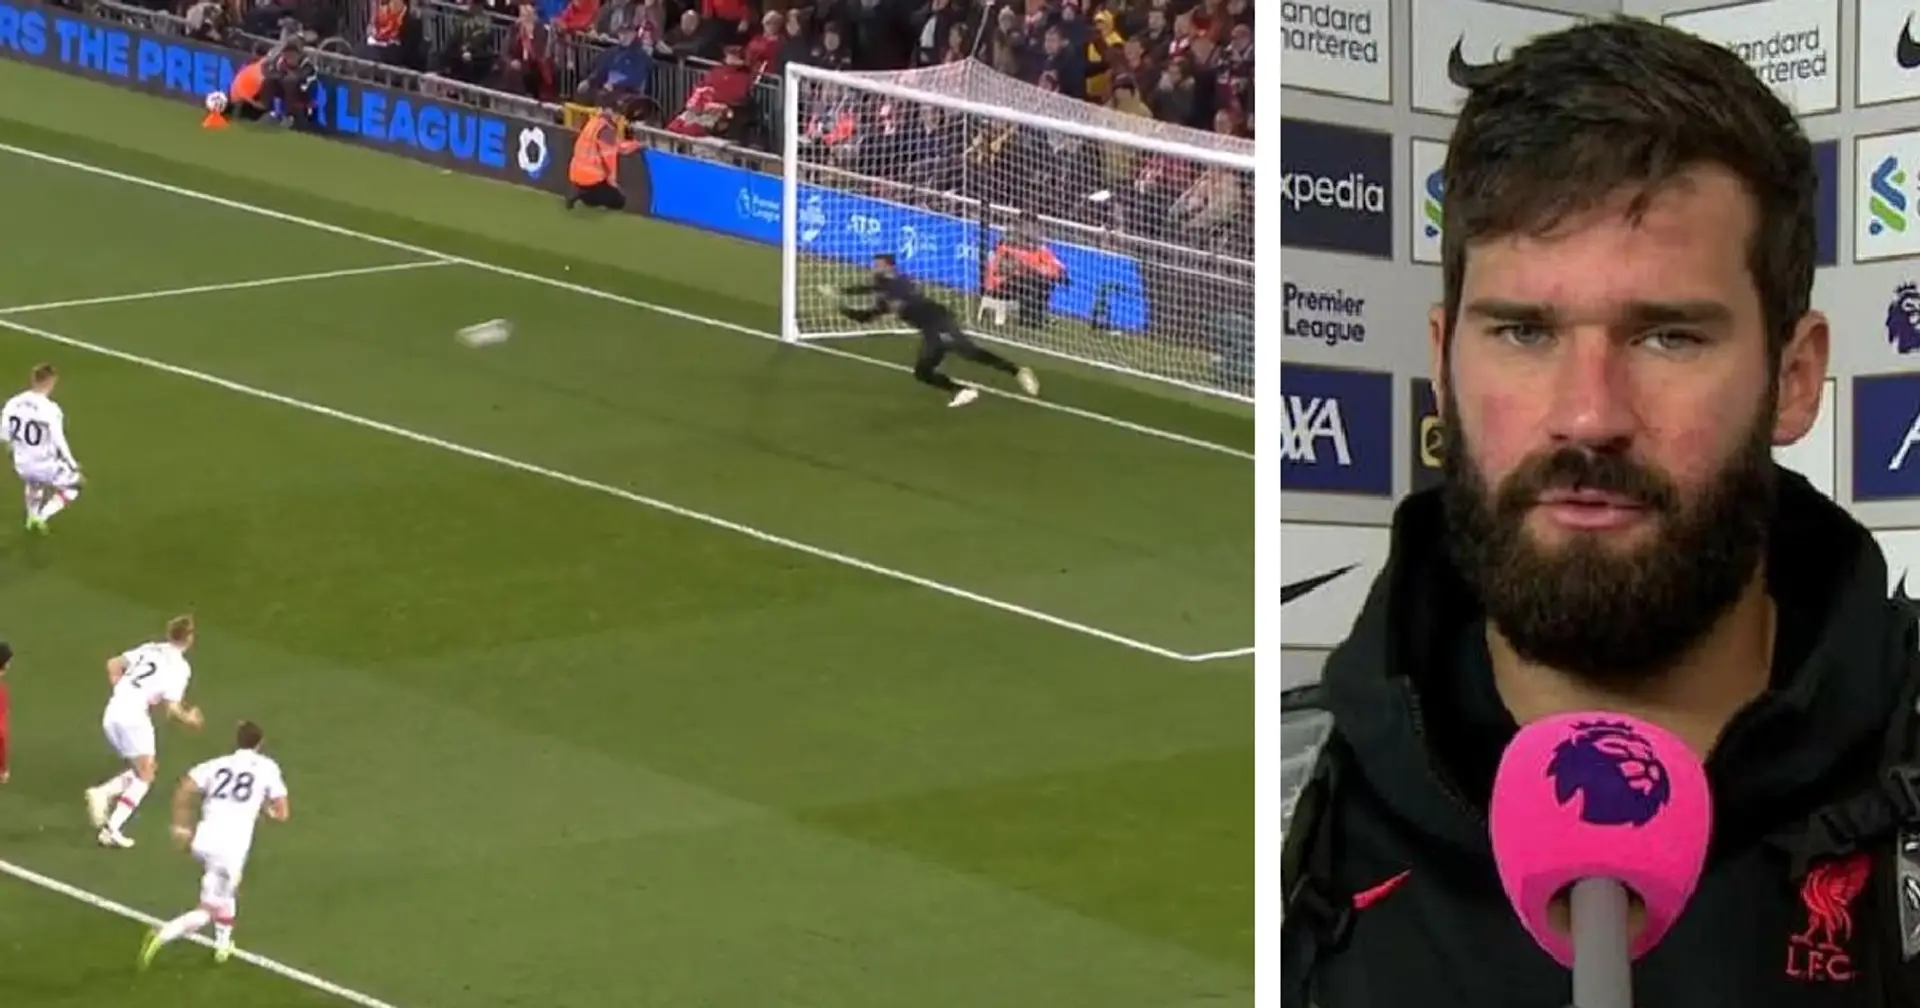 'In football everybody studies everybody': Alisson remains tight-lipped on his penalty save analysis